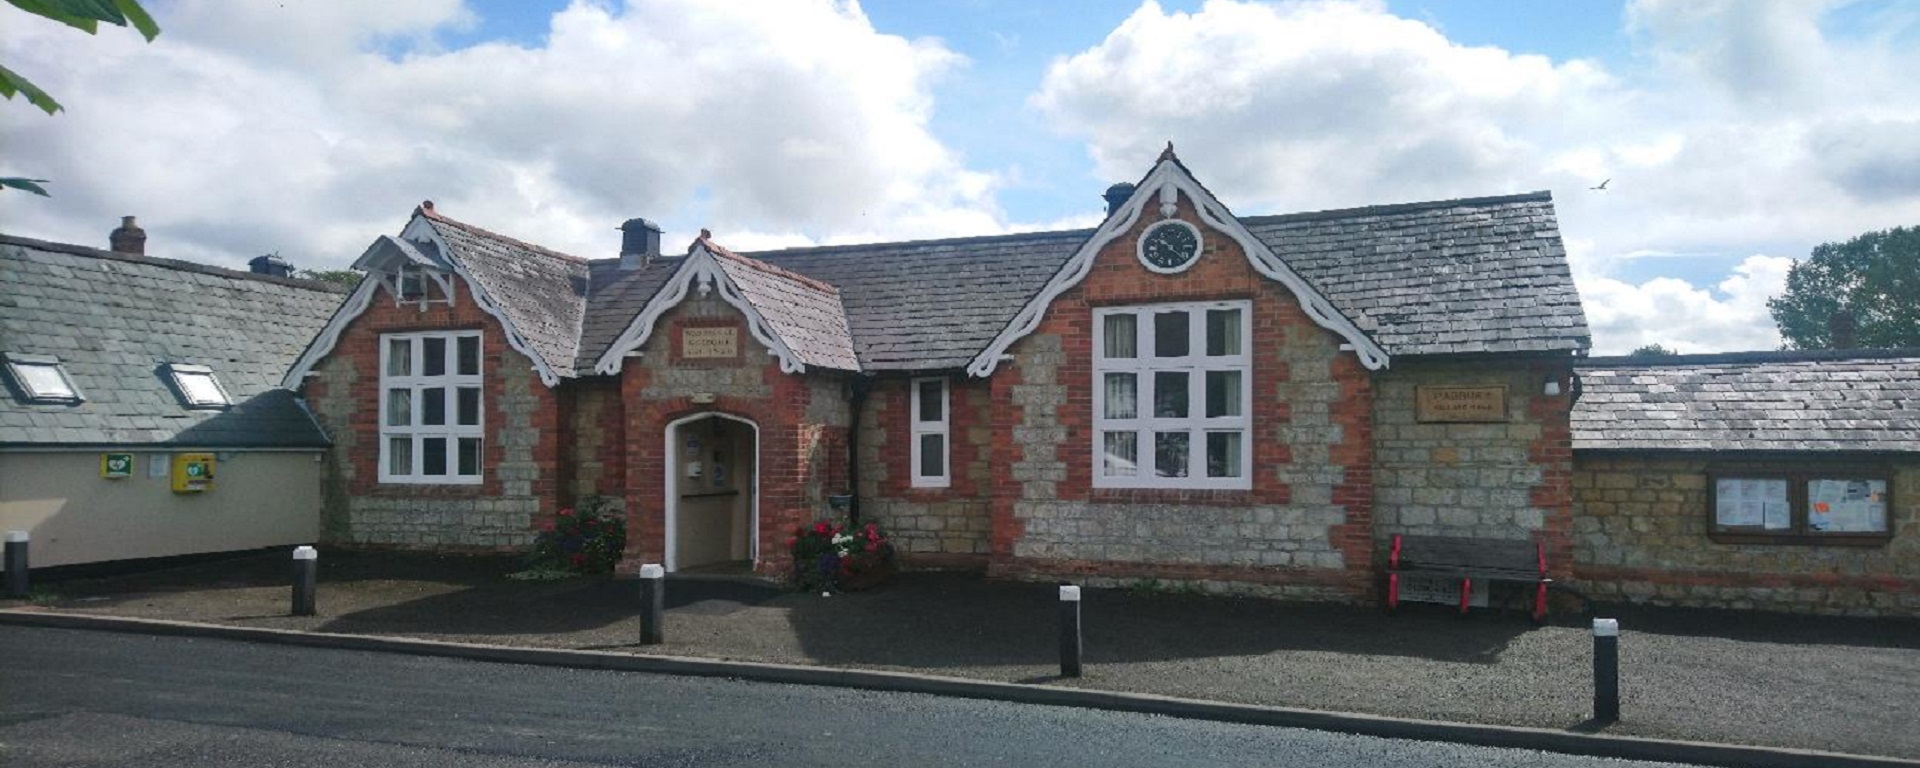 This is a picture of Padbury Village Hall which was formerly the village school